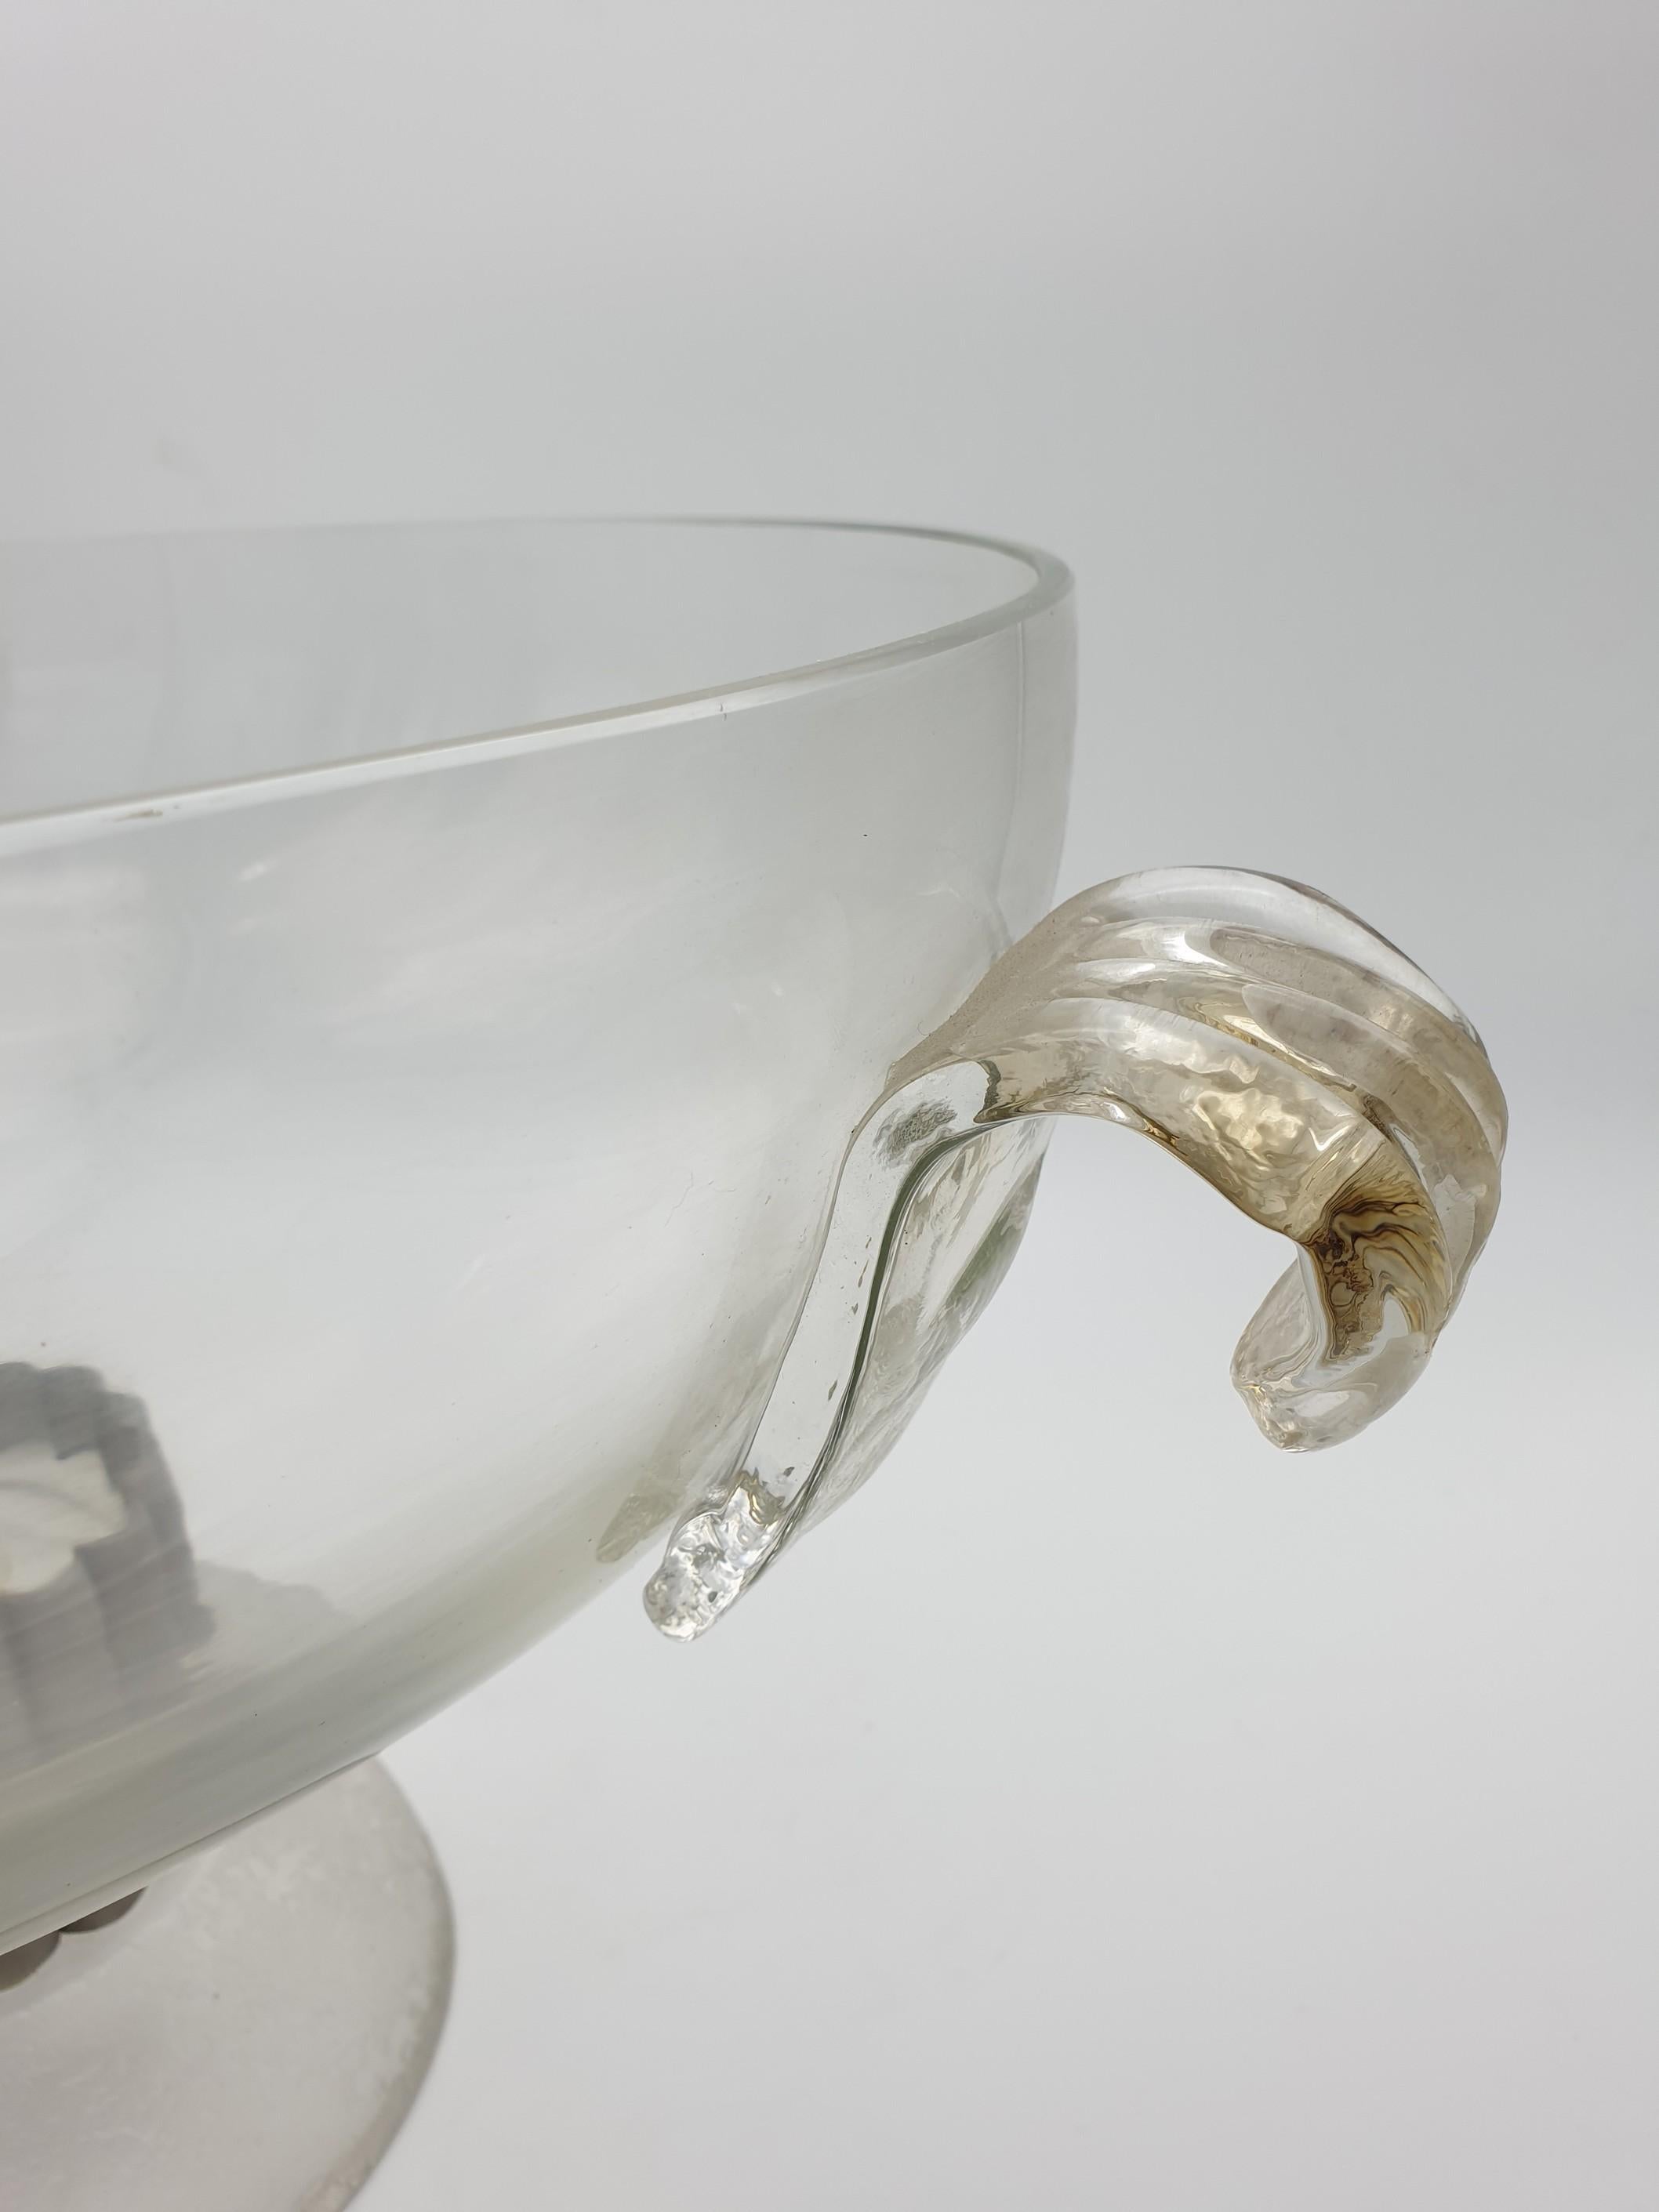 Giant Murano glass bowl by the glass factory Gino Cenedese e Figlio, a true piece of clean line and 